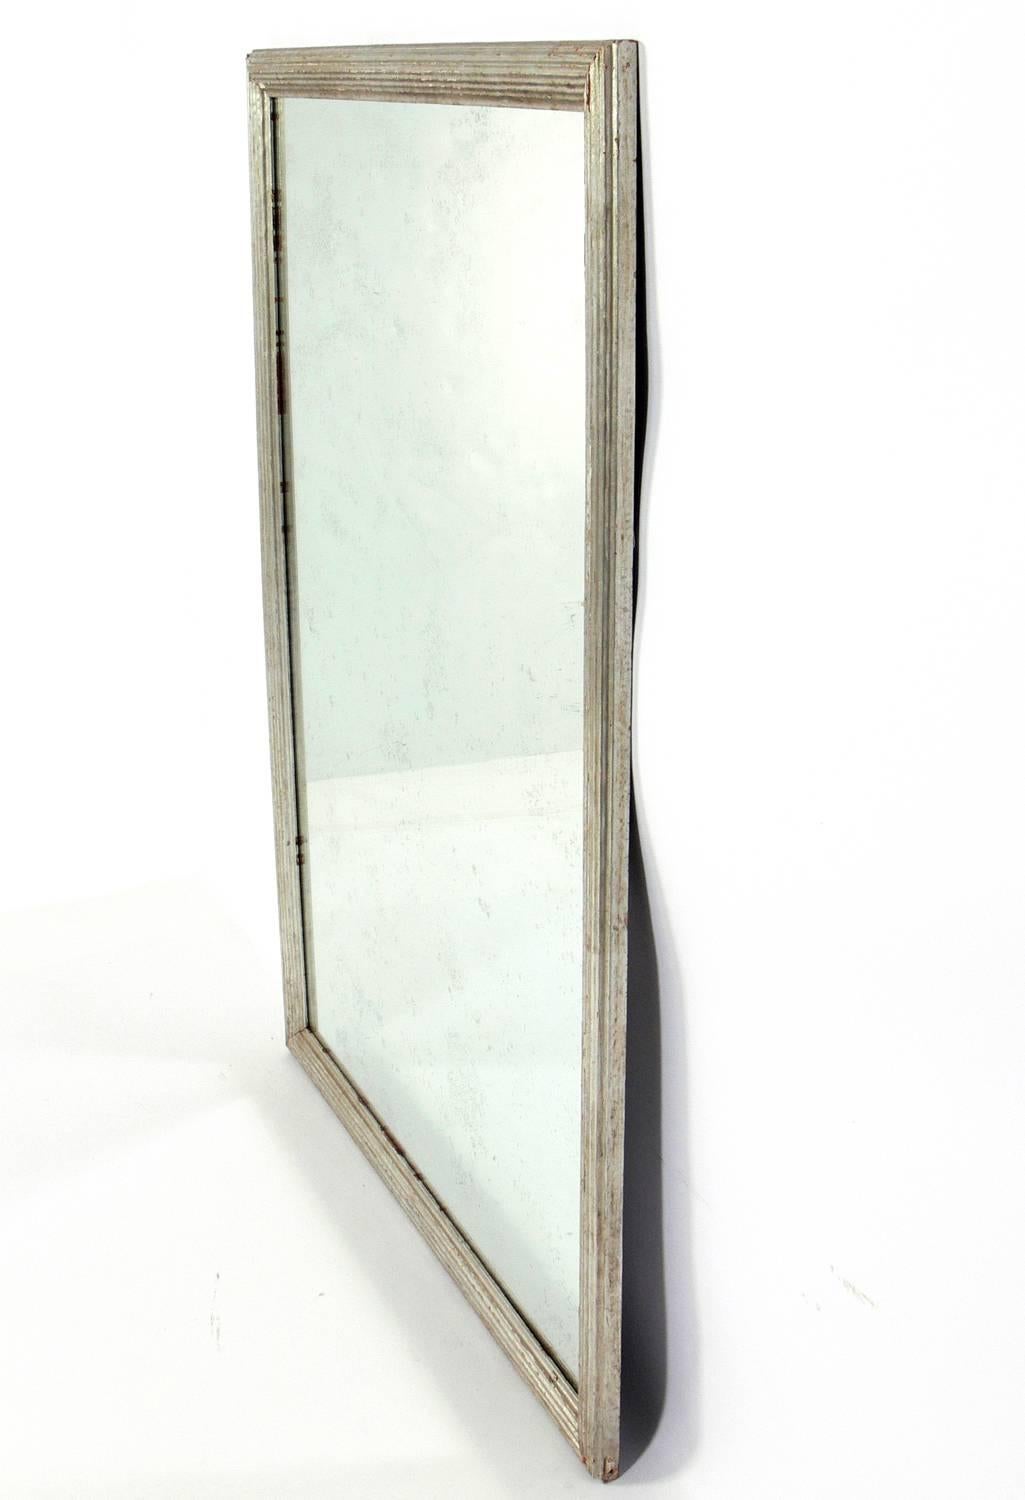 Silver finished antiqued mirror, American, circa 1930s. Retains original distressed silver finish over the gesso and wood and fitted with an antiqued mirror.